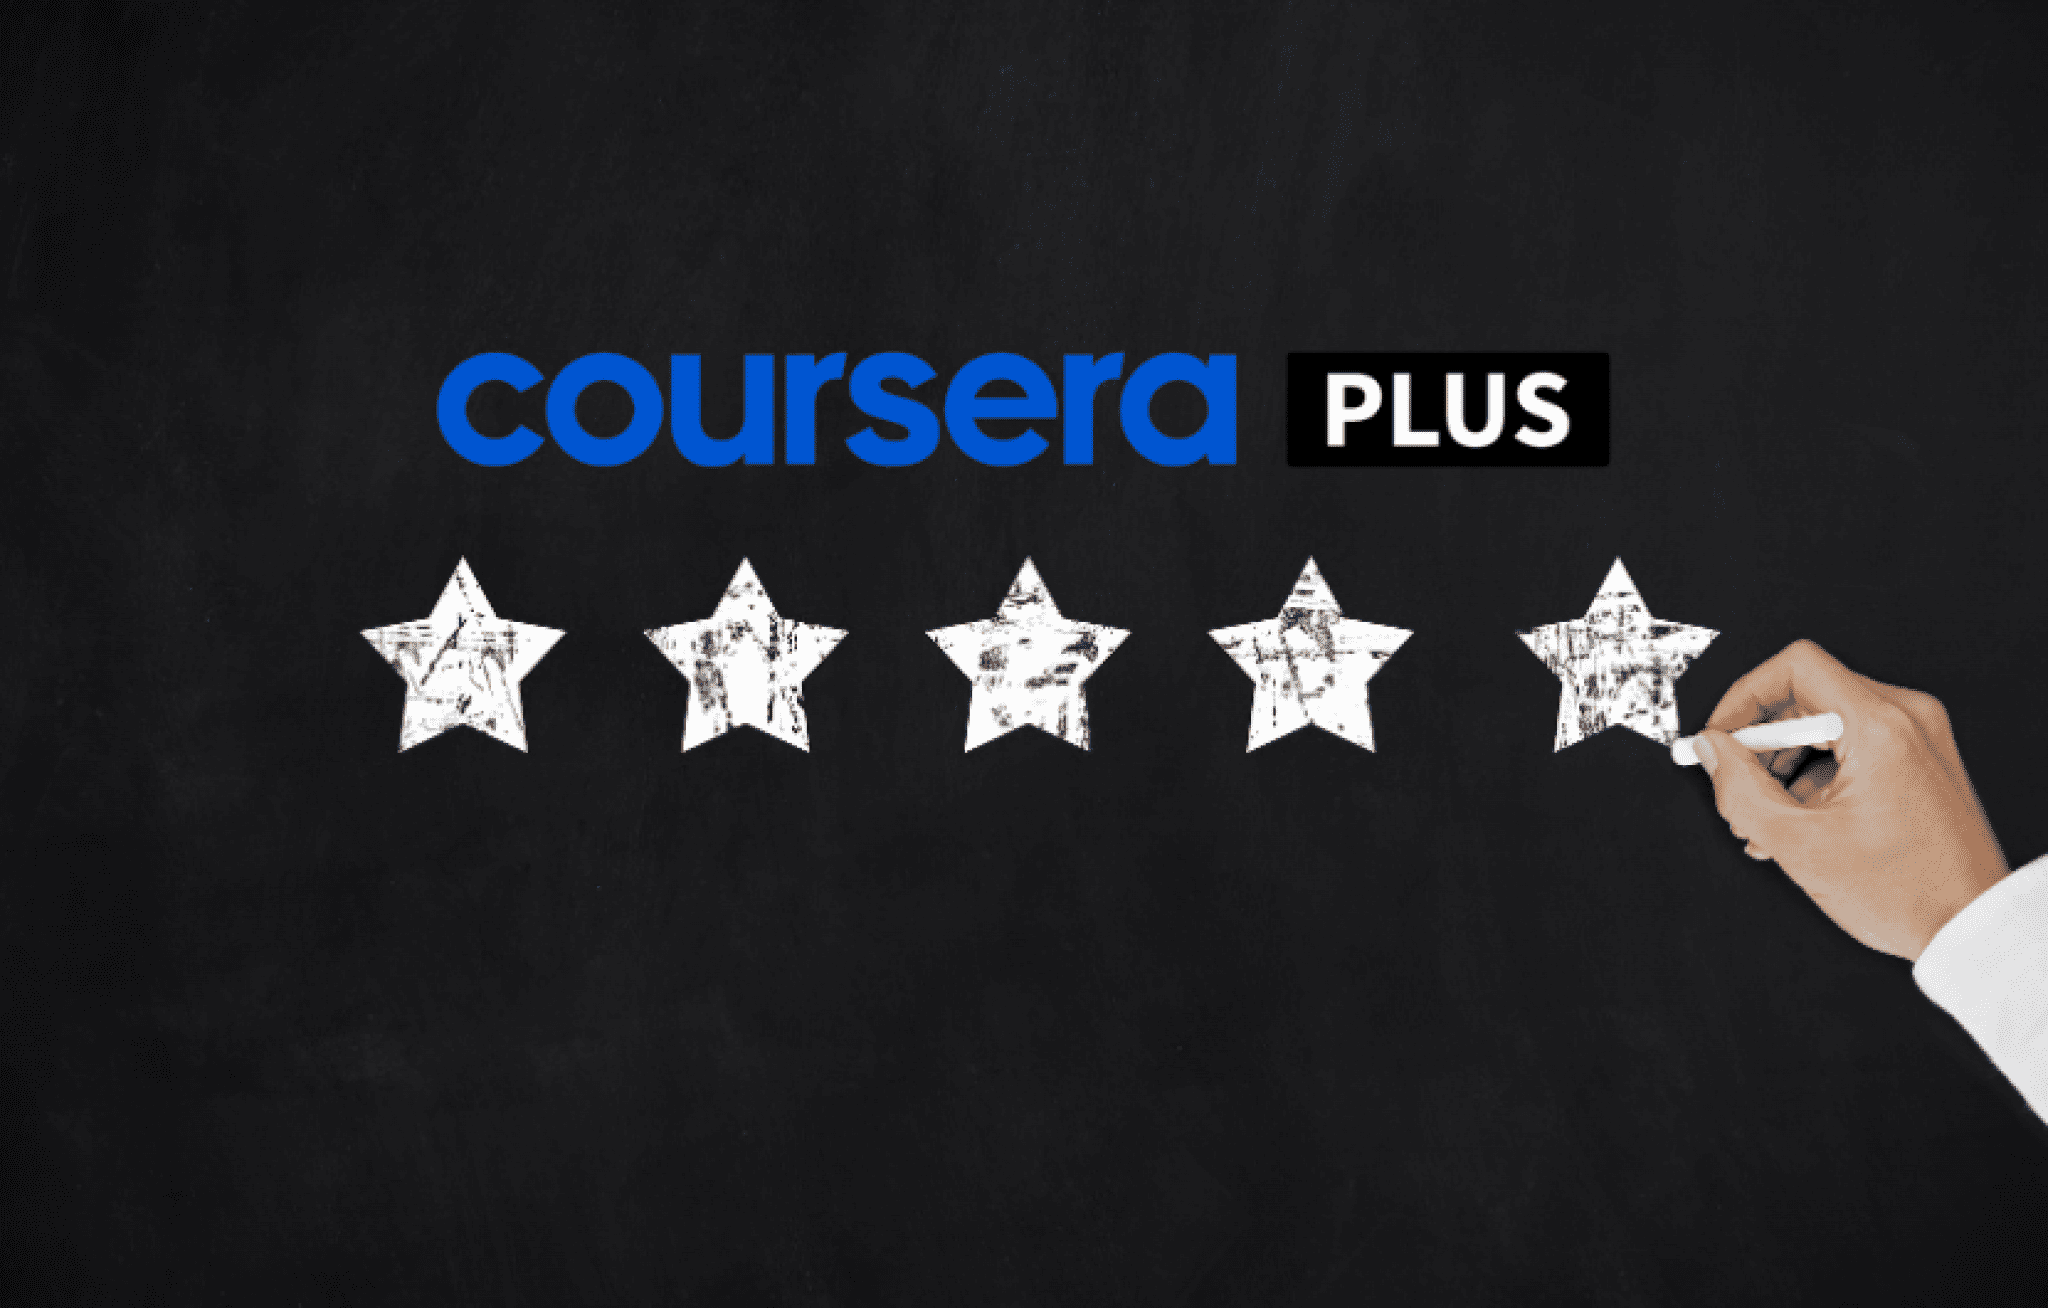 Build A Better You In One Year With Coursera Plus (review)